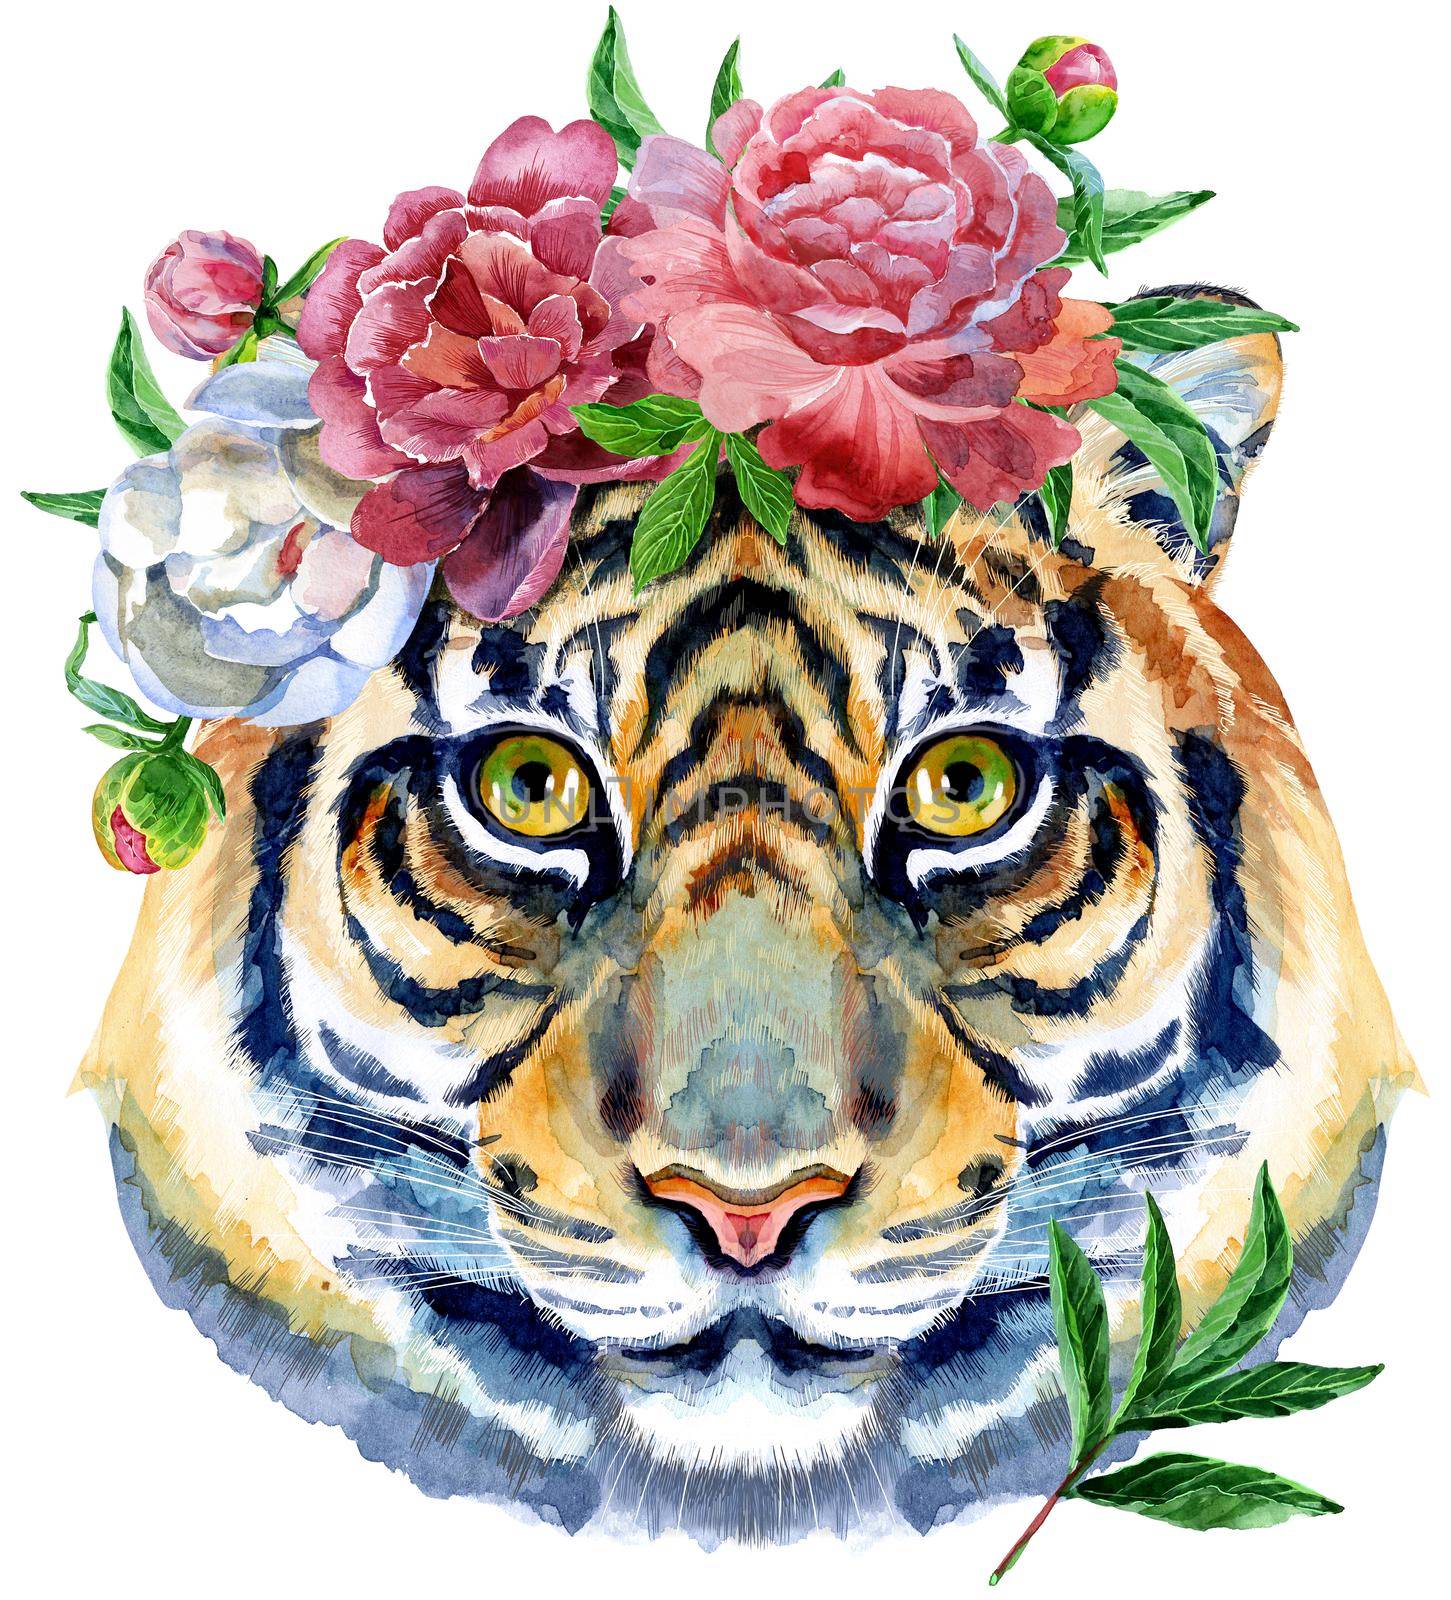 Tiger horoscope character watercolor illustration with flowers isolated on white background. by NataOmsk